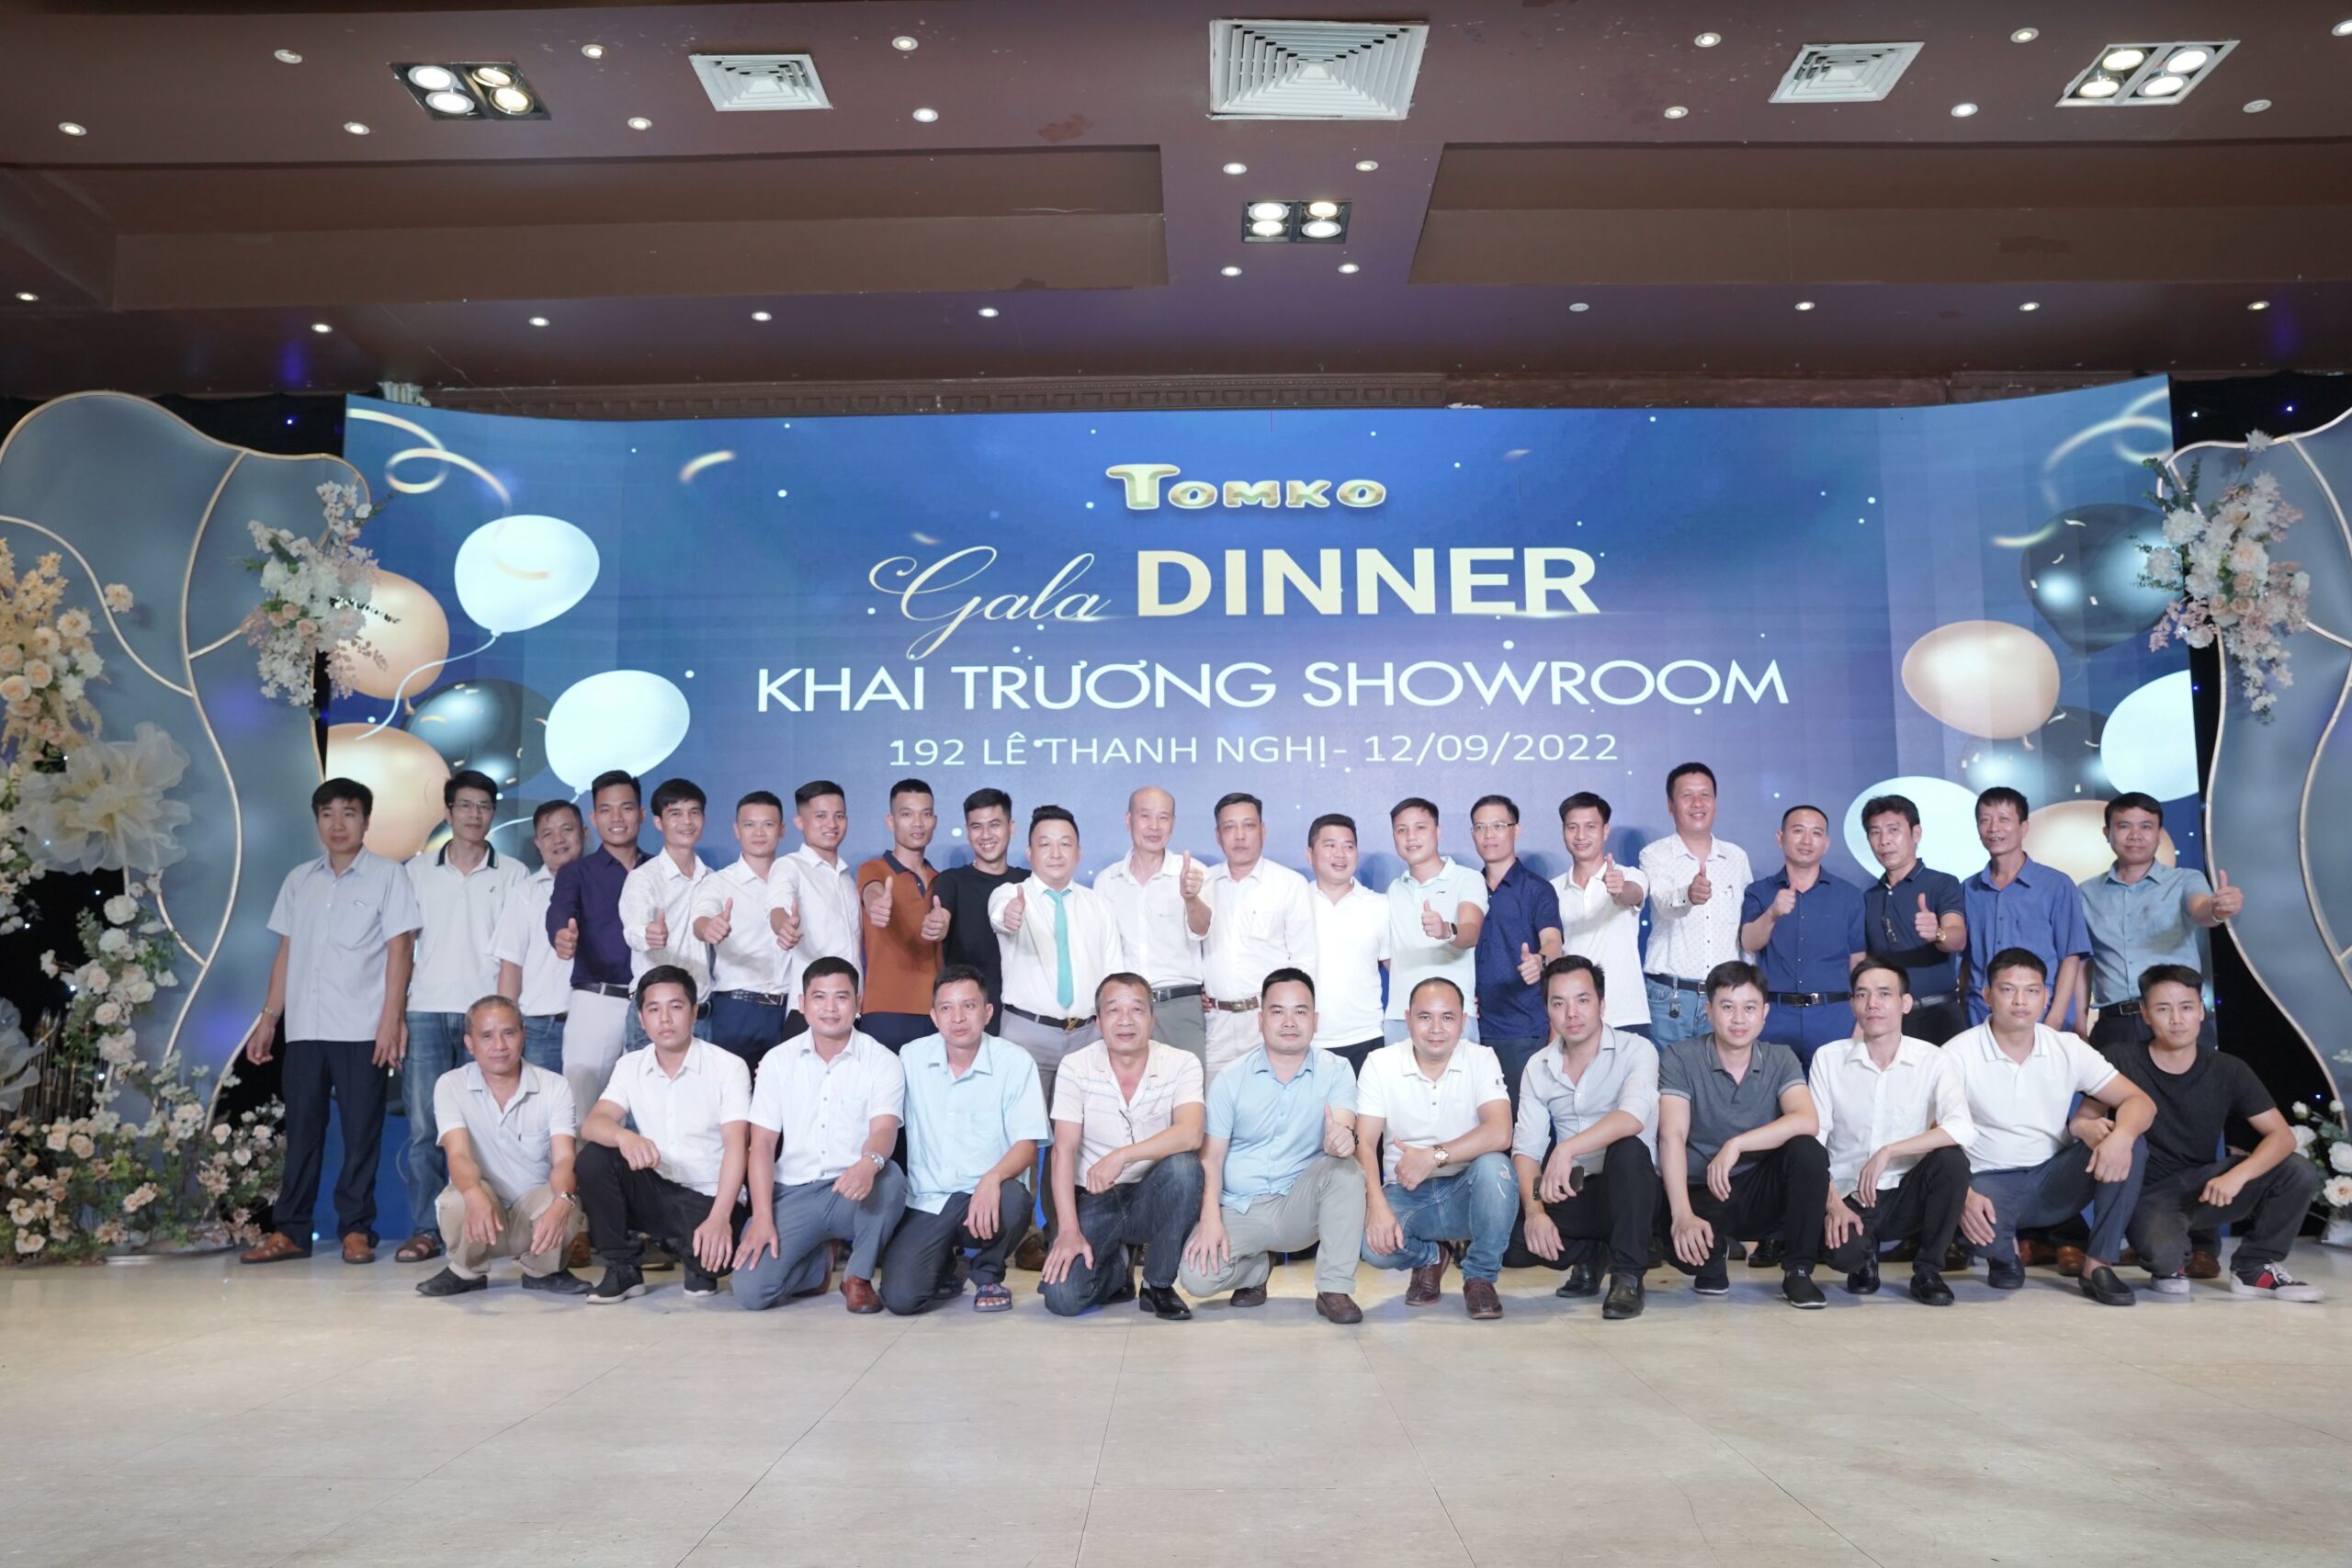 anh gala dinner khai truong showroom tomko 192 le thanh nghi 1